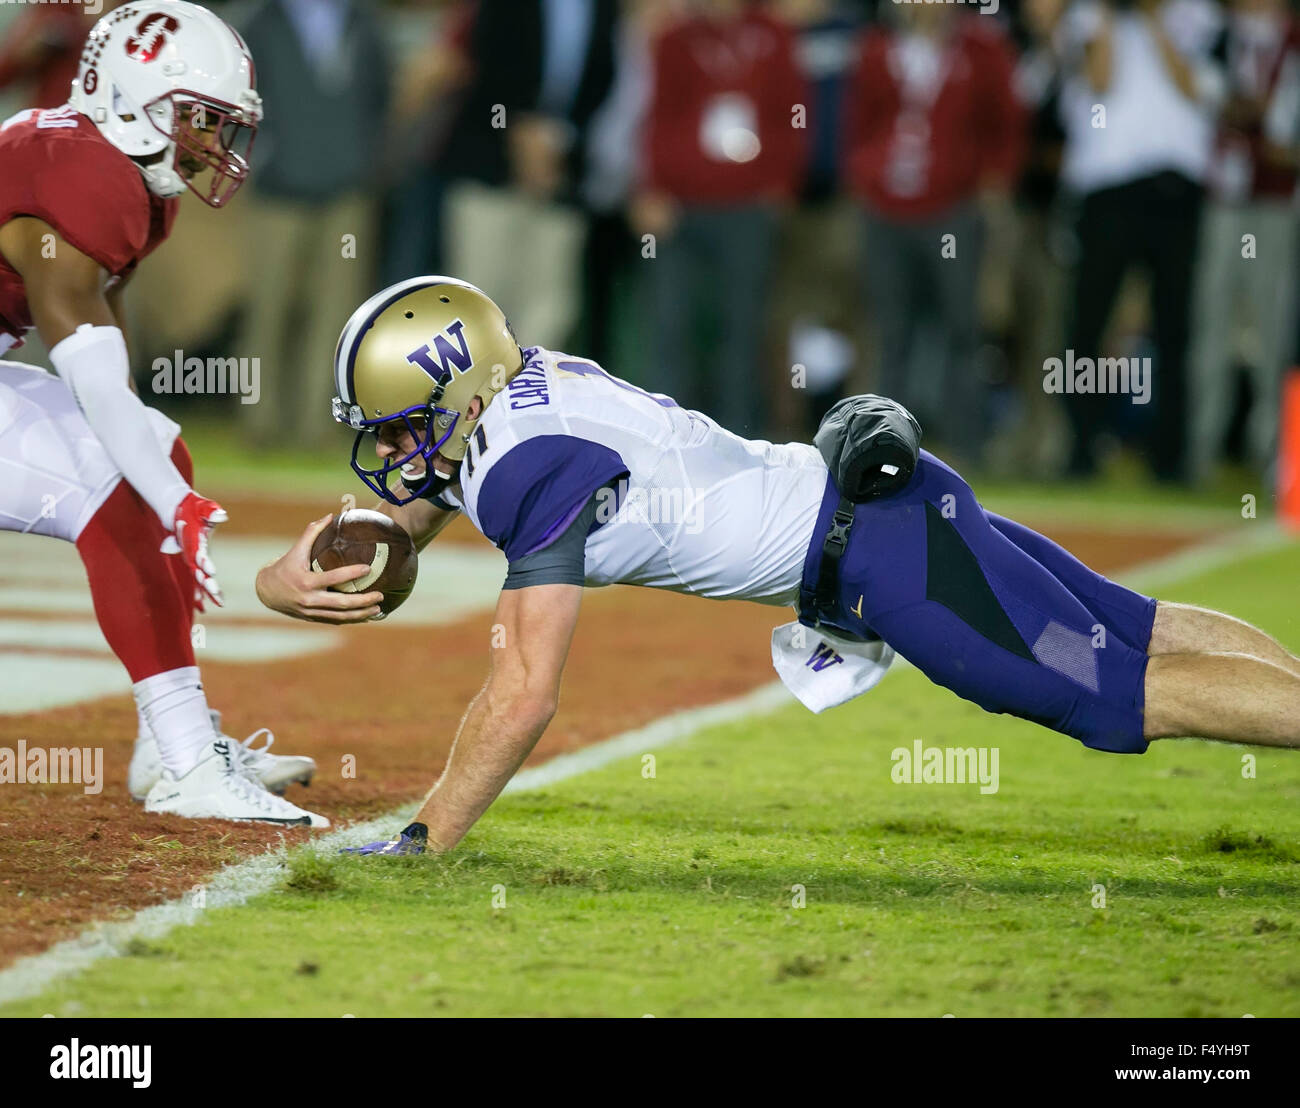 Palo Alto, CA. 24th Oct, 2015. Washington Huskies quarterback K.J. Carta-Samuels (11) dives into the end zone for a touchdown during the NCAA Football game between the Stanford Cardinal and the Washington Huskies at Stanford Stadium in Palo Alto, CA. Stanford defeated Washington 31-14. Damon Tarver/Cal Sport Media/Alamy Live News Stock Photo